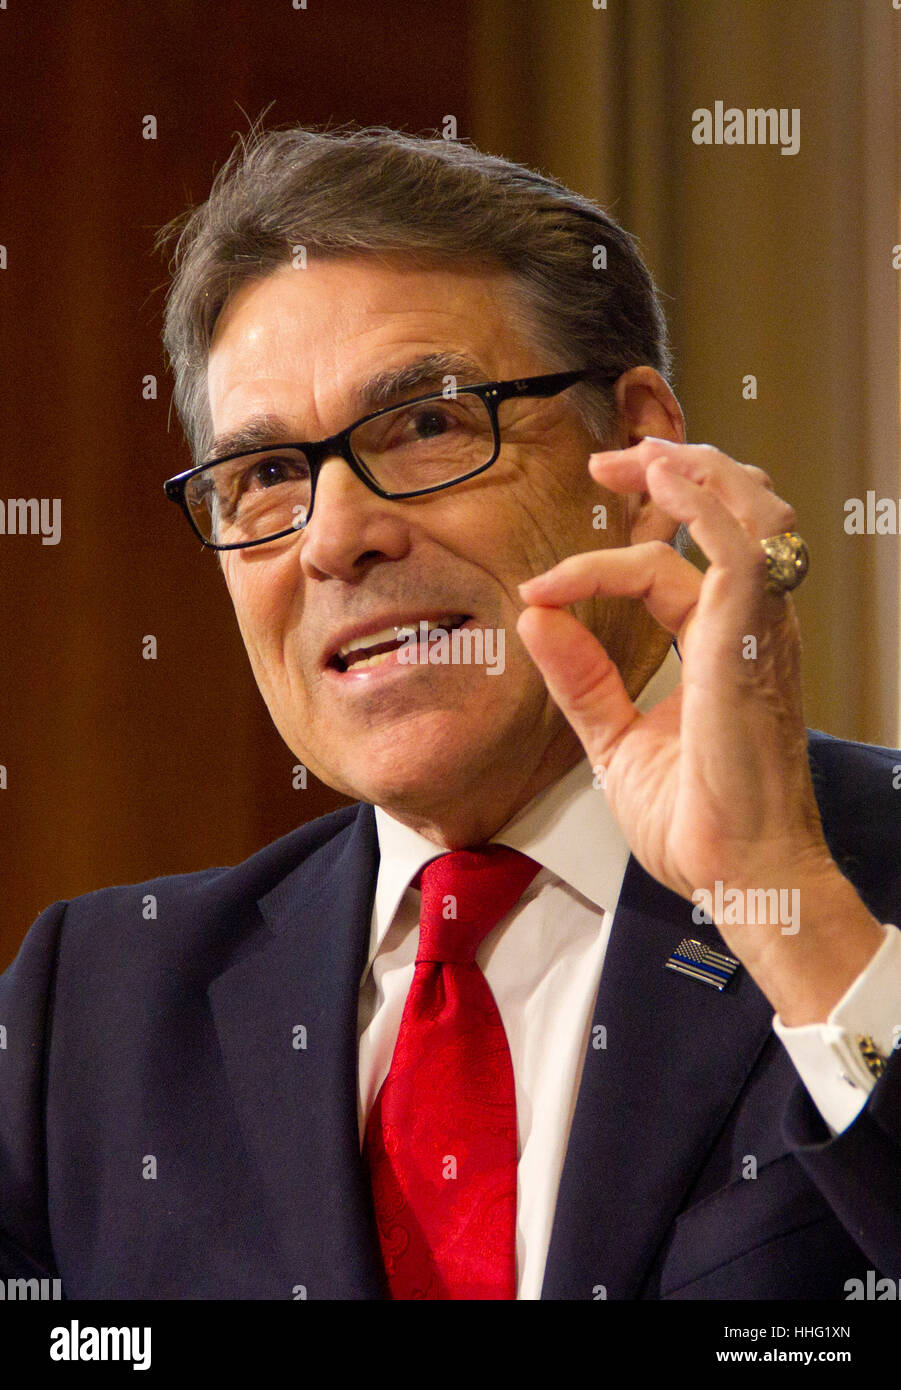 Washington, USA. 19th Jan, 2017. Former Texas Governor Rick Perry, President-elect Donald Trump's choice as Secretary of Energy, testifies during his confirmation hearing before the Senate Committee on Energy and Natural Resources on Capitol Hill January 19, 2017 in Washington, DC. Perry is expected to face questions about his connections to the oil and gas industry. Credit: PixelPro/Alamy Live News Stock Photo